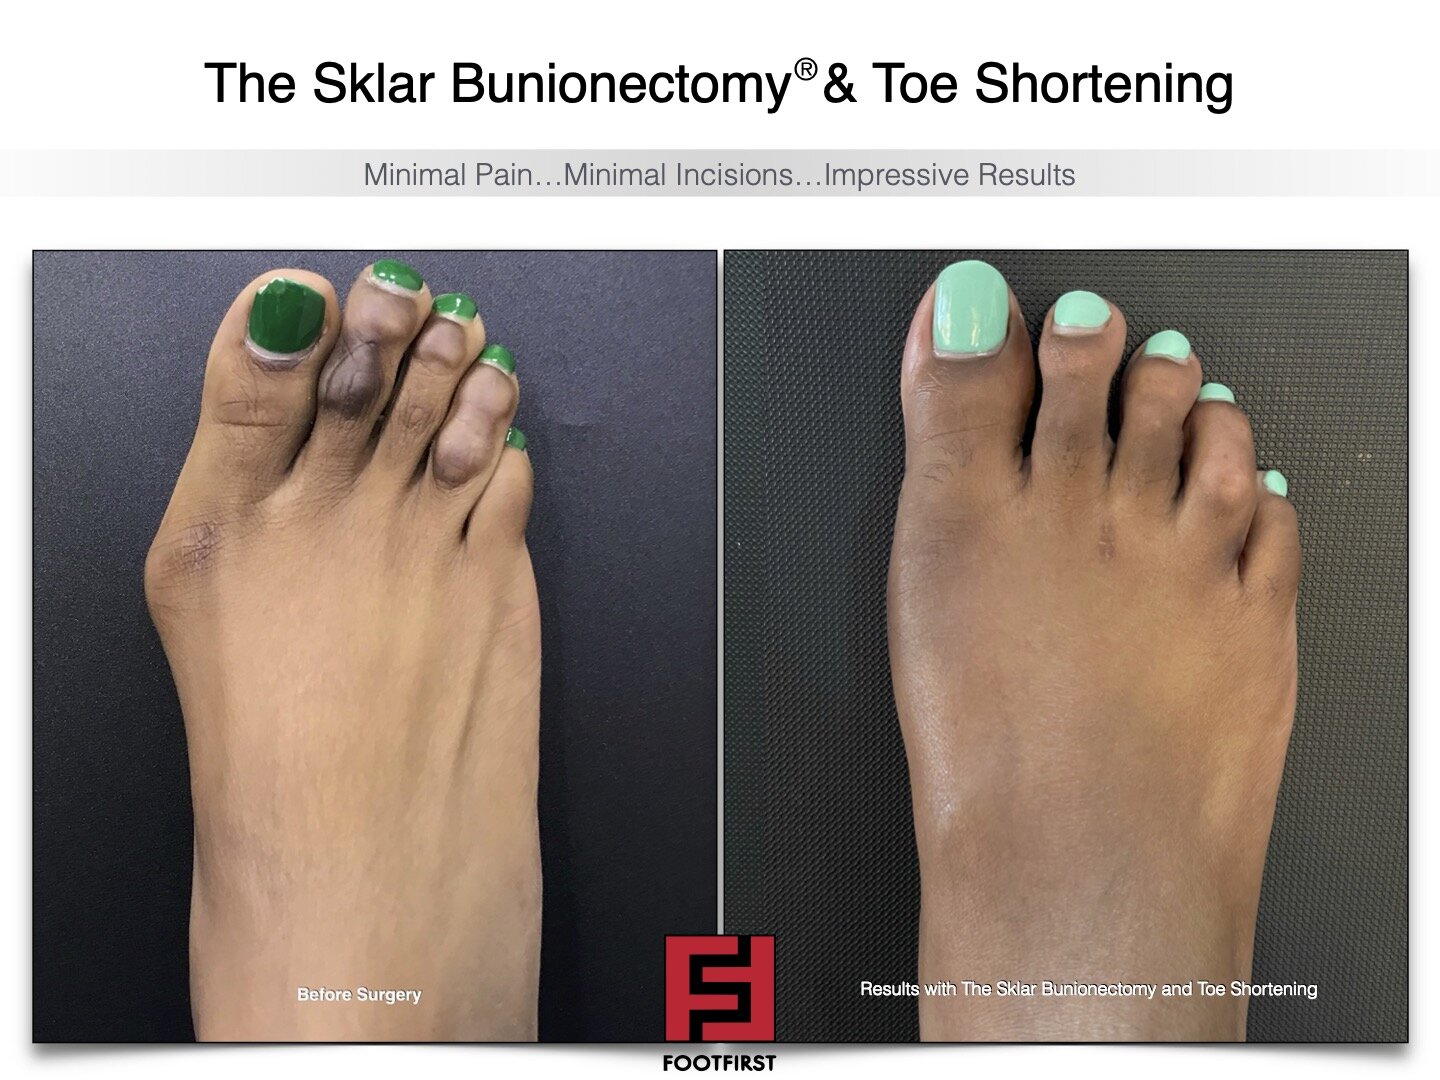 www.footfirst.com | Cosmetic Bunion and Toe Shortening Surgery COPYRIGHT FOOTFIRST 139.jpg